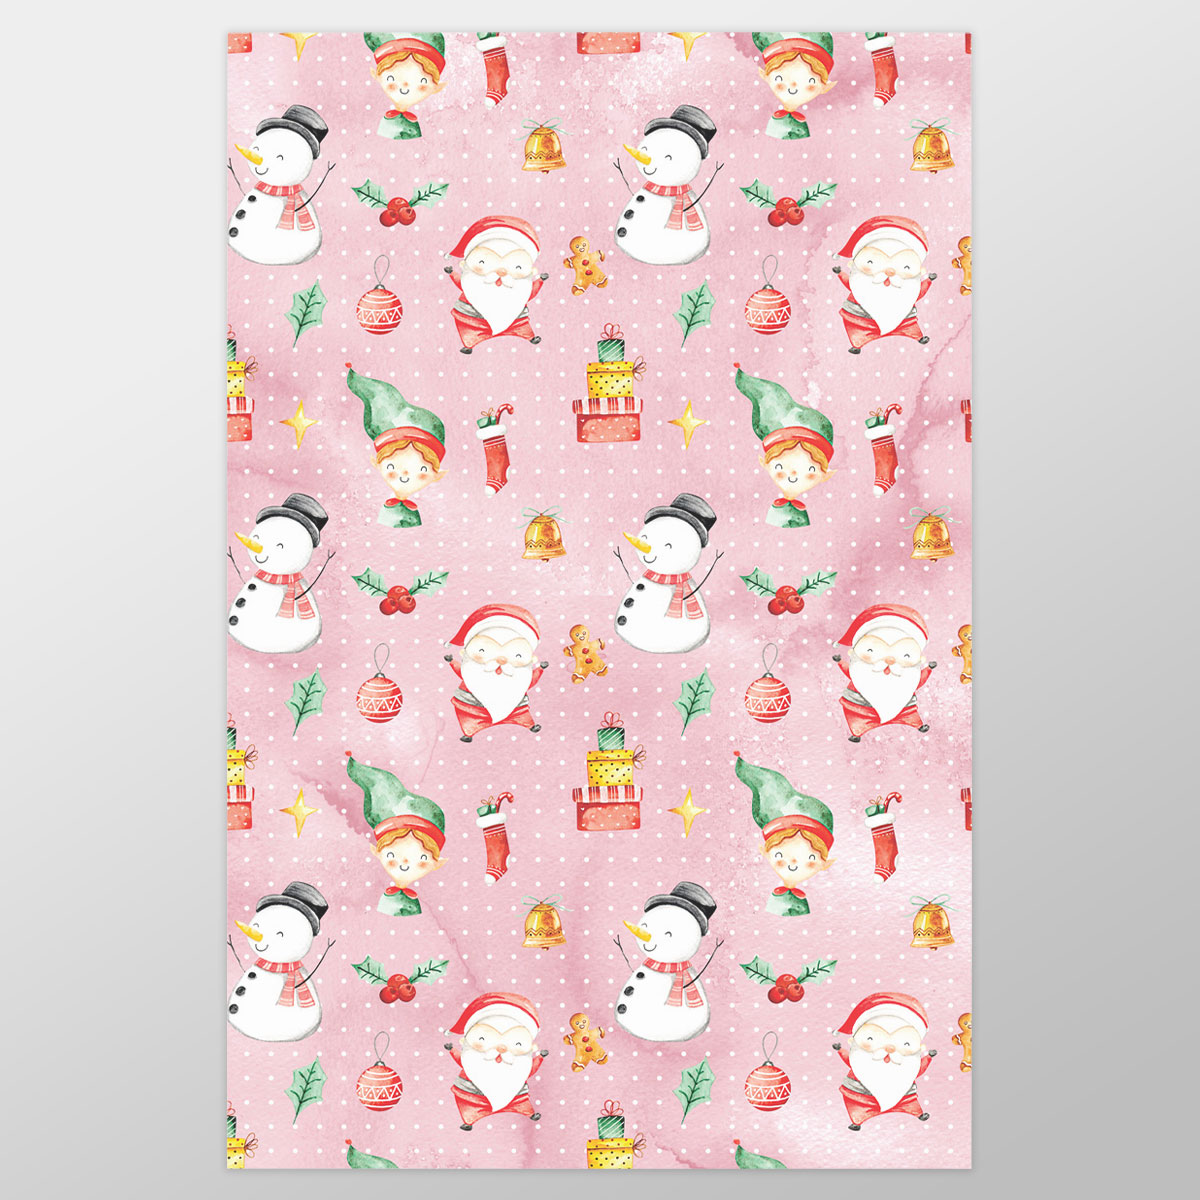 Santa Clause, Snowman And Christmas Elf With Christmas Gifts Wrapping Paper